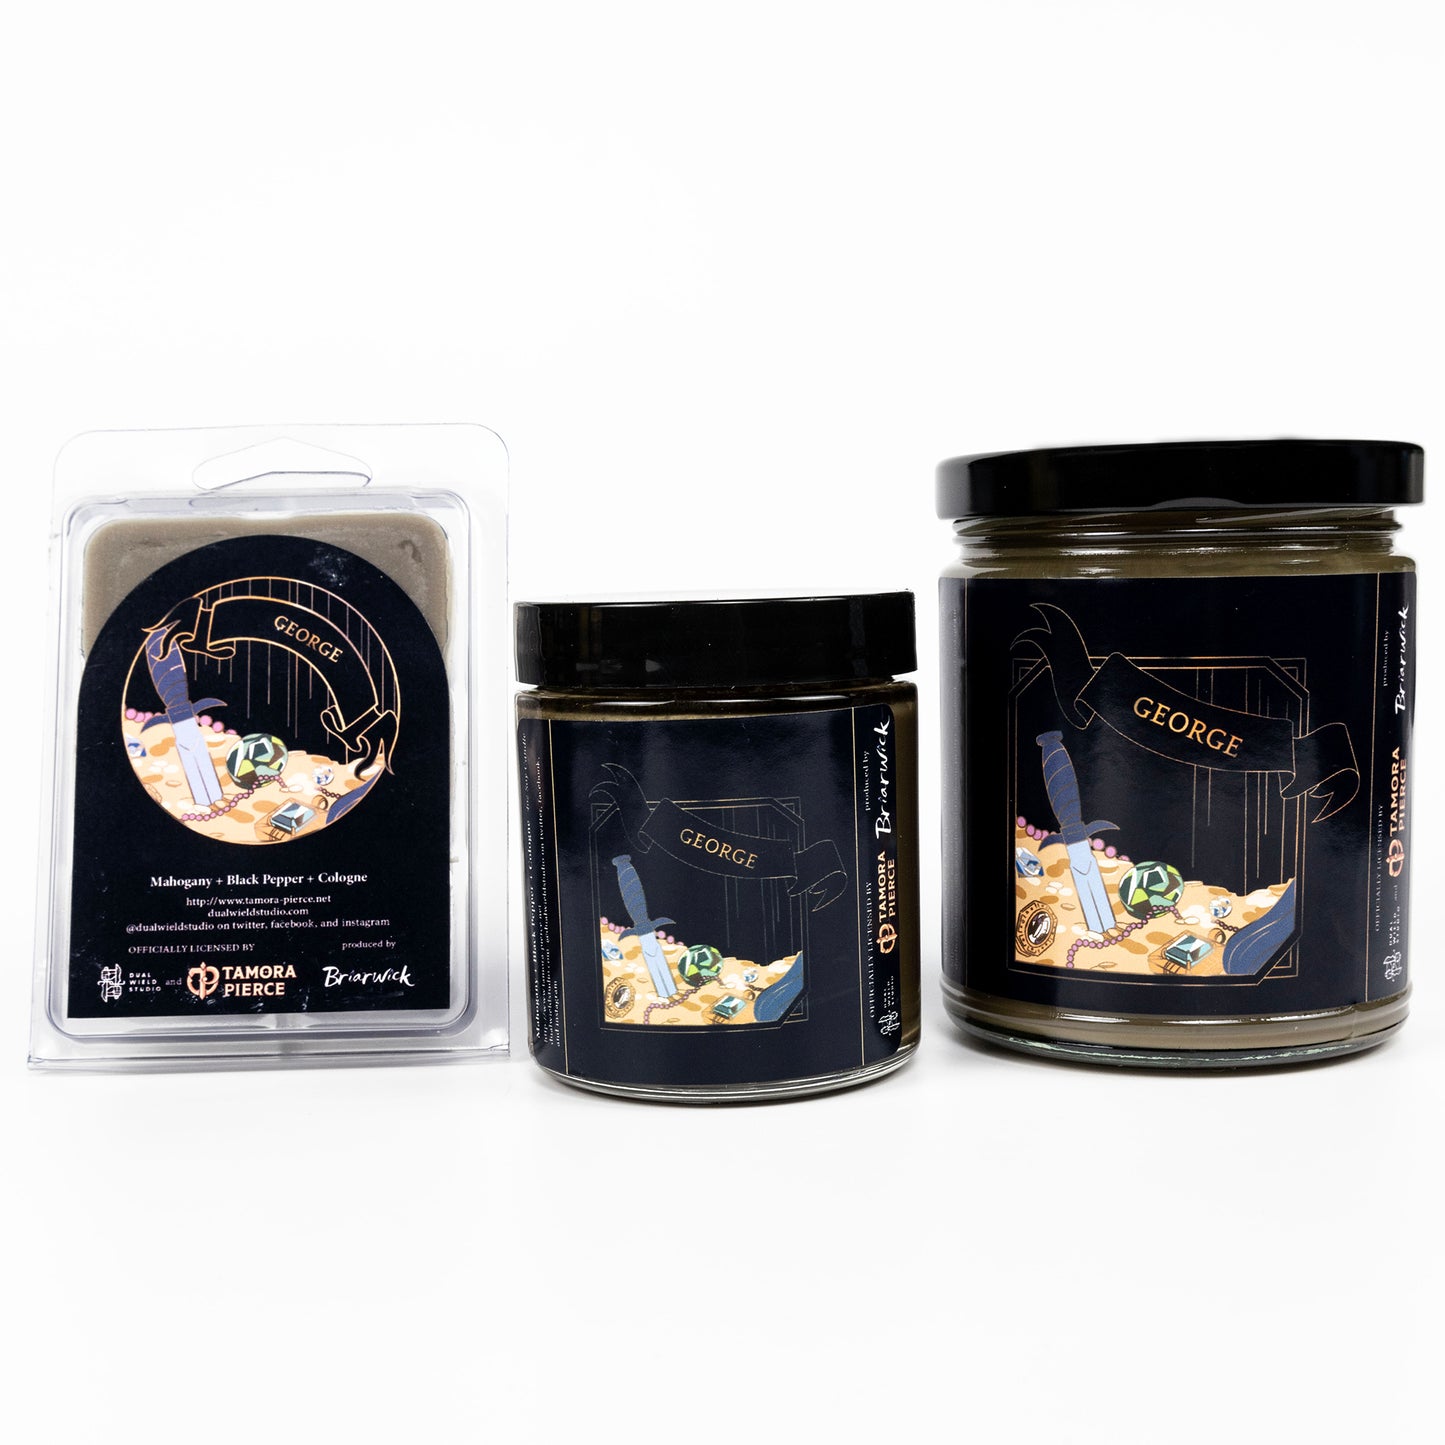 Full set of both George candles and wax melts, all with olive wax. The label illustrations show a dagger embedded in a pile of treasure. "George" is written across an angled ribbon.